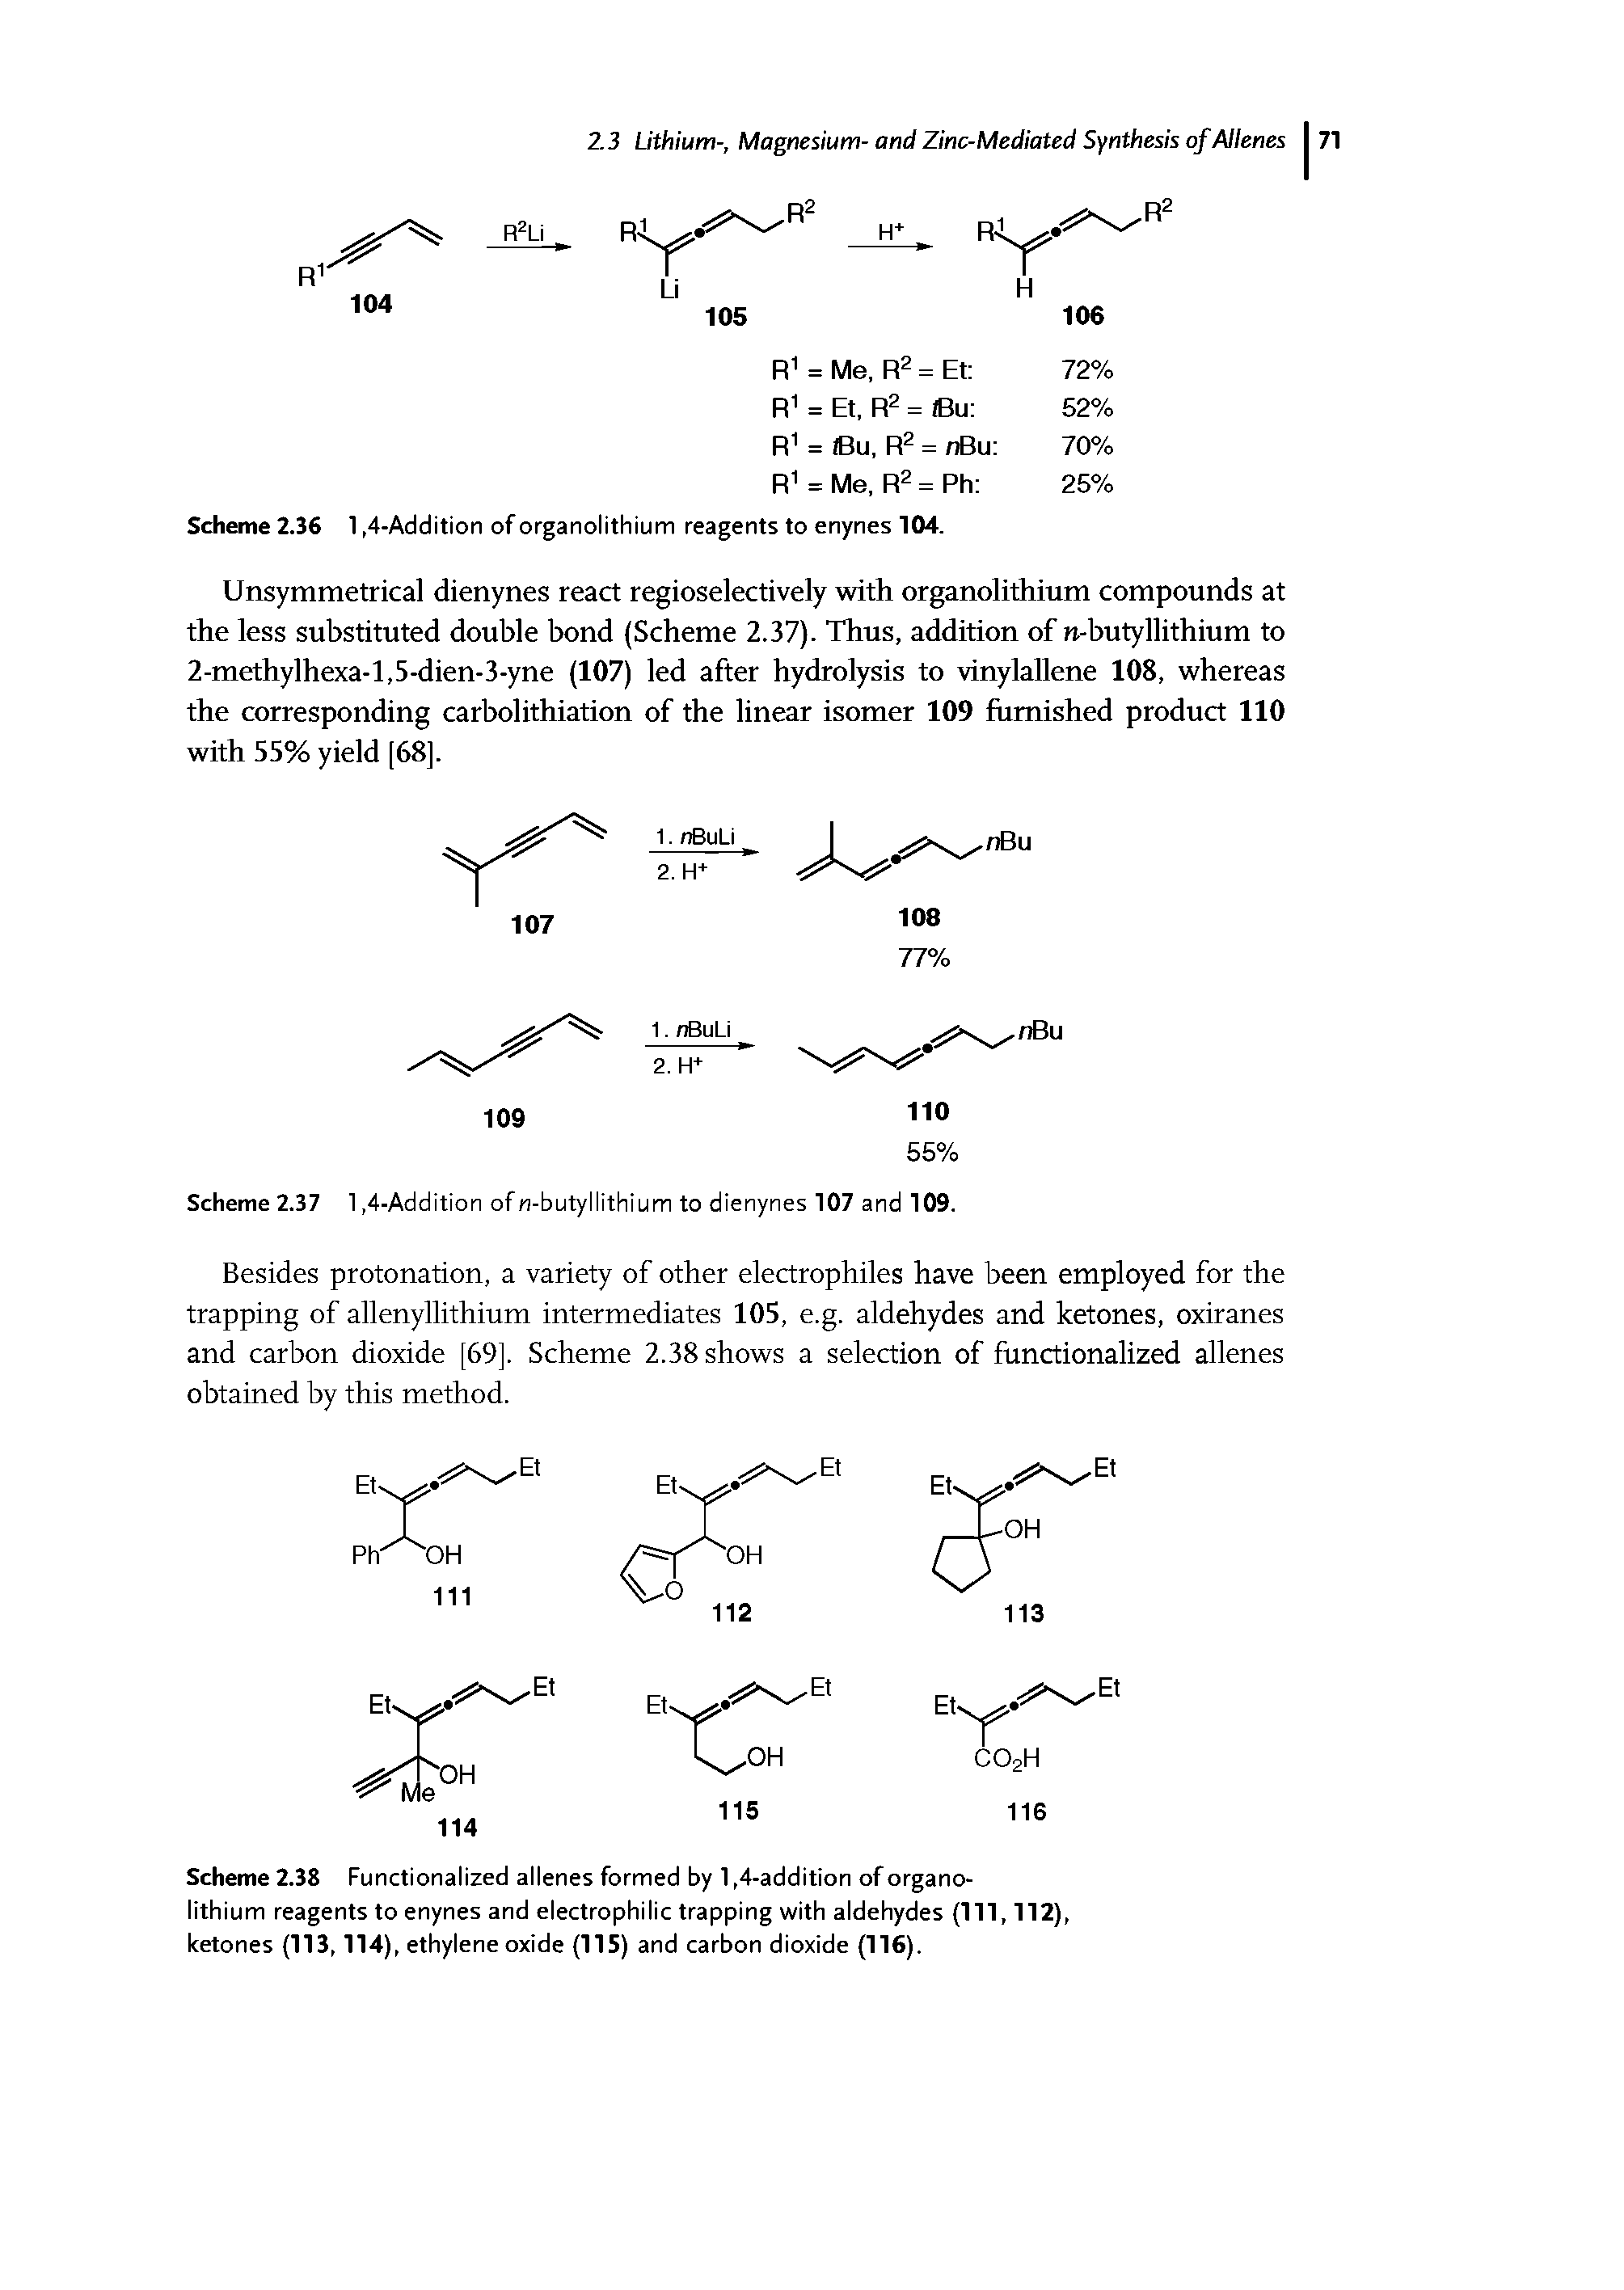 Scheme 2.38 Functionalized allenes formed by 1,4-addition of organolithium reagents to enynes and electrophilic trapping with aldehydes (111, 112) ketones (113,114), ethylene oxide (115) and carbon dioxide (116).